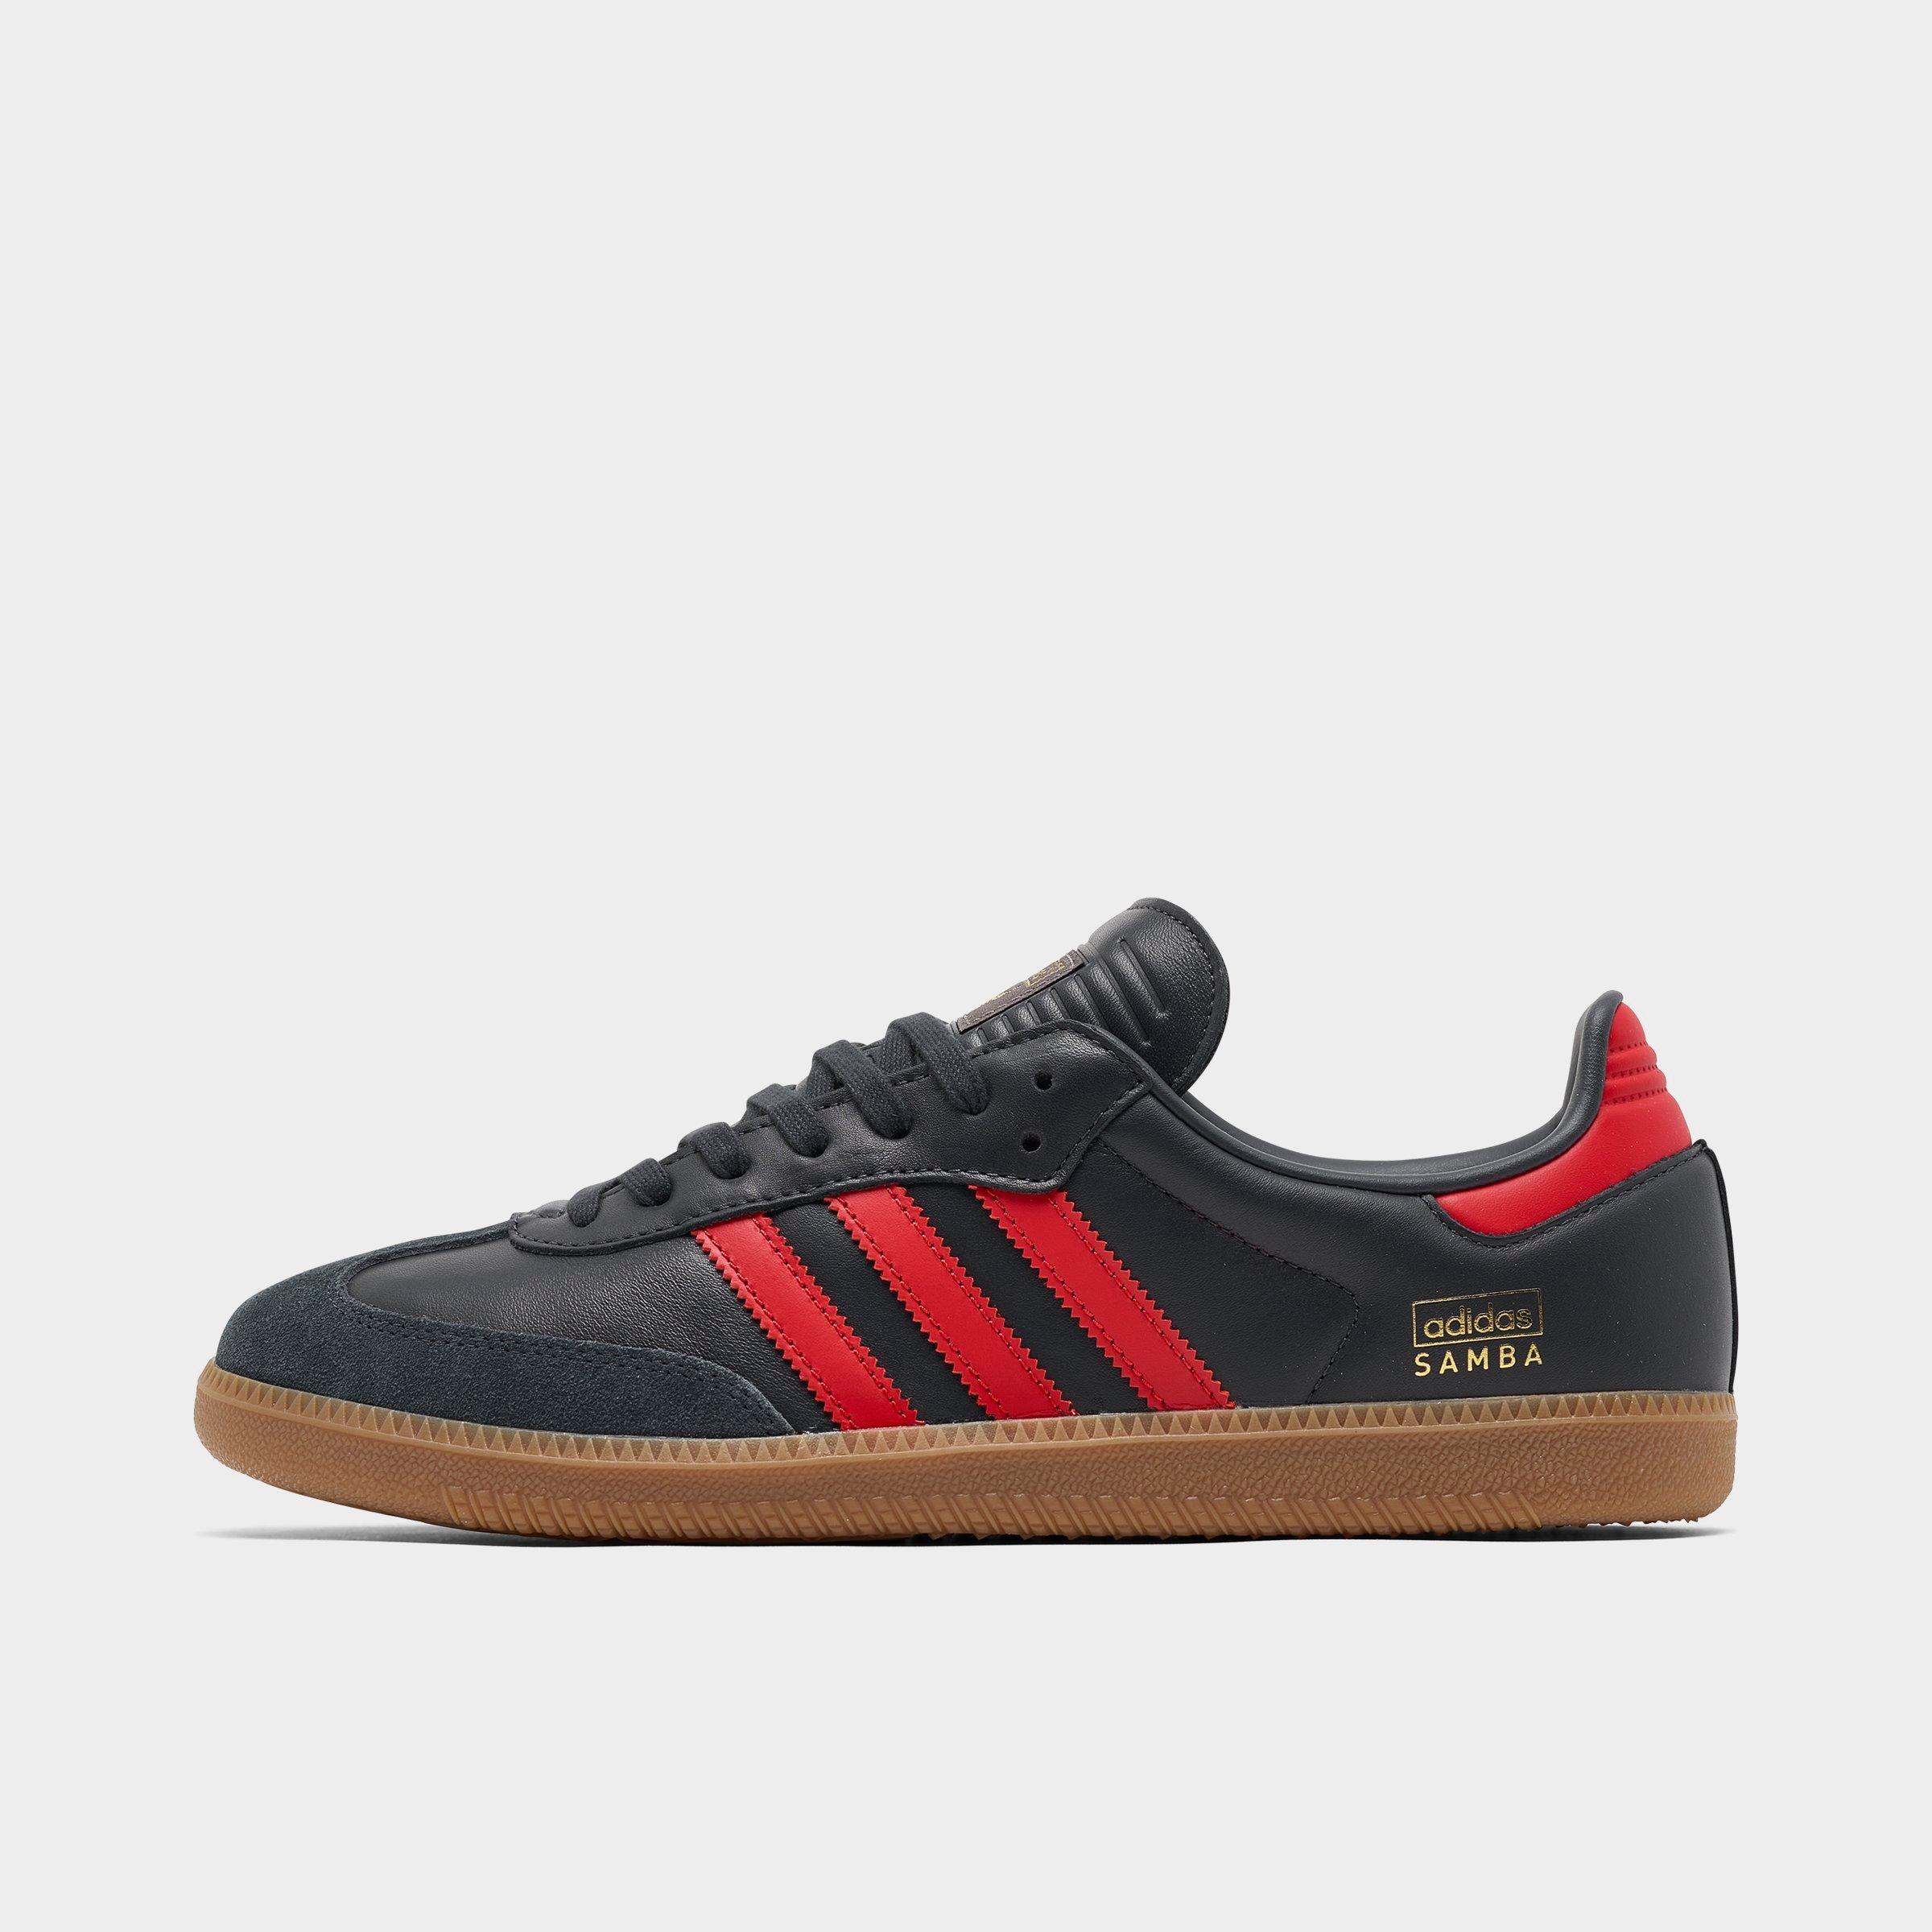 Adidas Men's Originals Samba OG Casual Shoes in Red/Black/Carbon Size 8.0 Leather/Suede